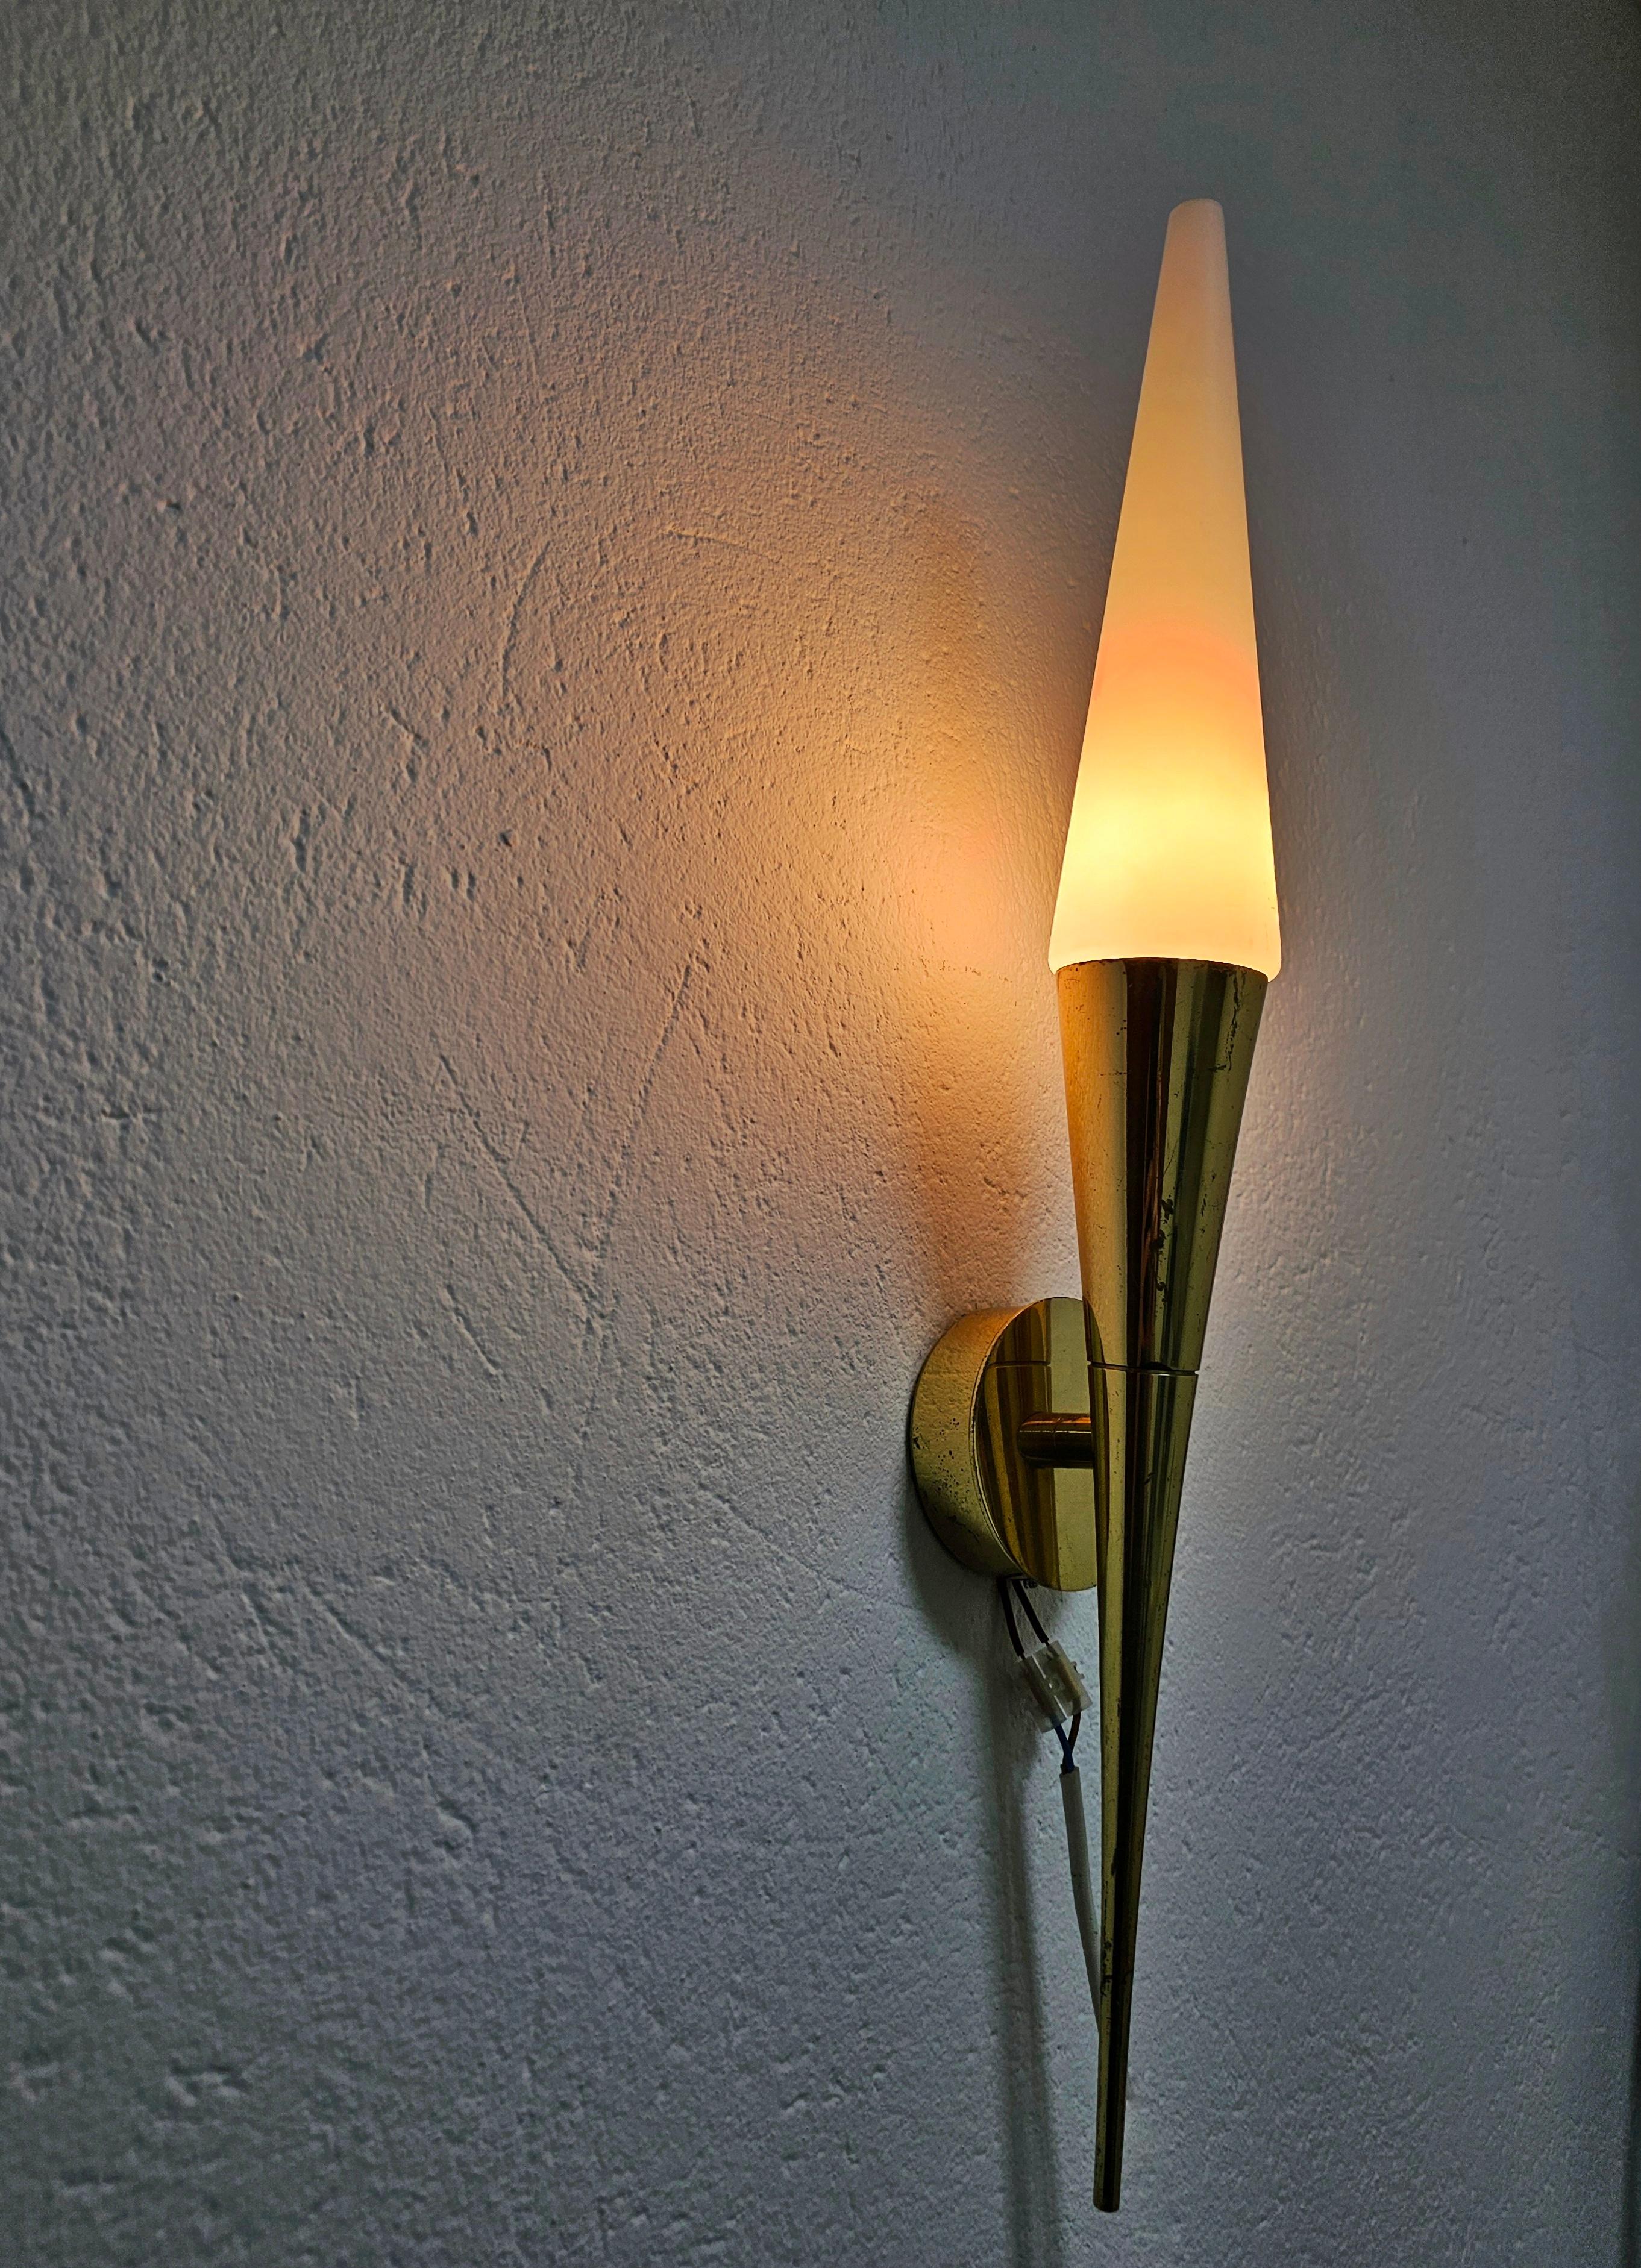 Listed price is per piece.

In this listing you will find gorgeous and very elegant Mid Century Modern sconces done in brass and opaline glass and manufactured by Limburg. Manufacturer's label is still attached.  They feature long, pointy and very